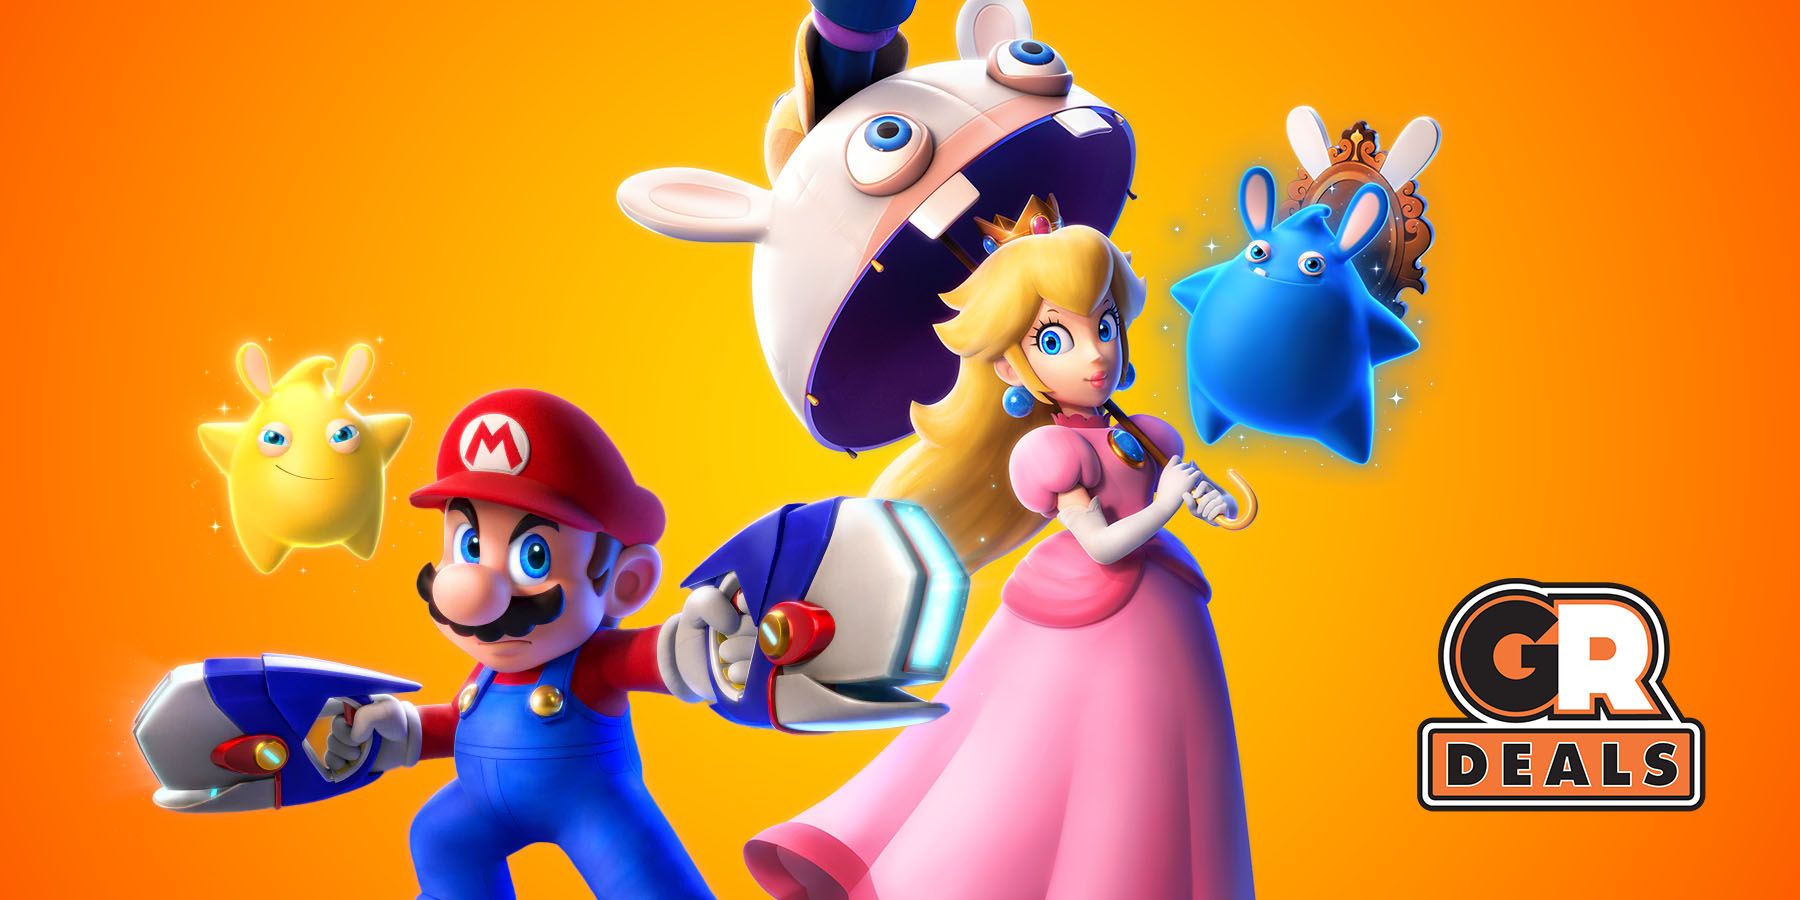 Discount Has the Mario + Rabbids Sparks of Hope for Switch at Just $29.99